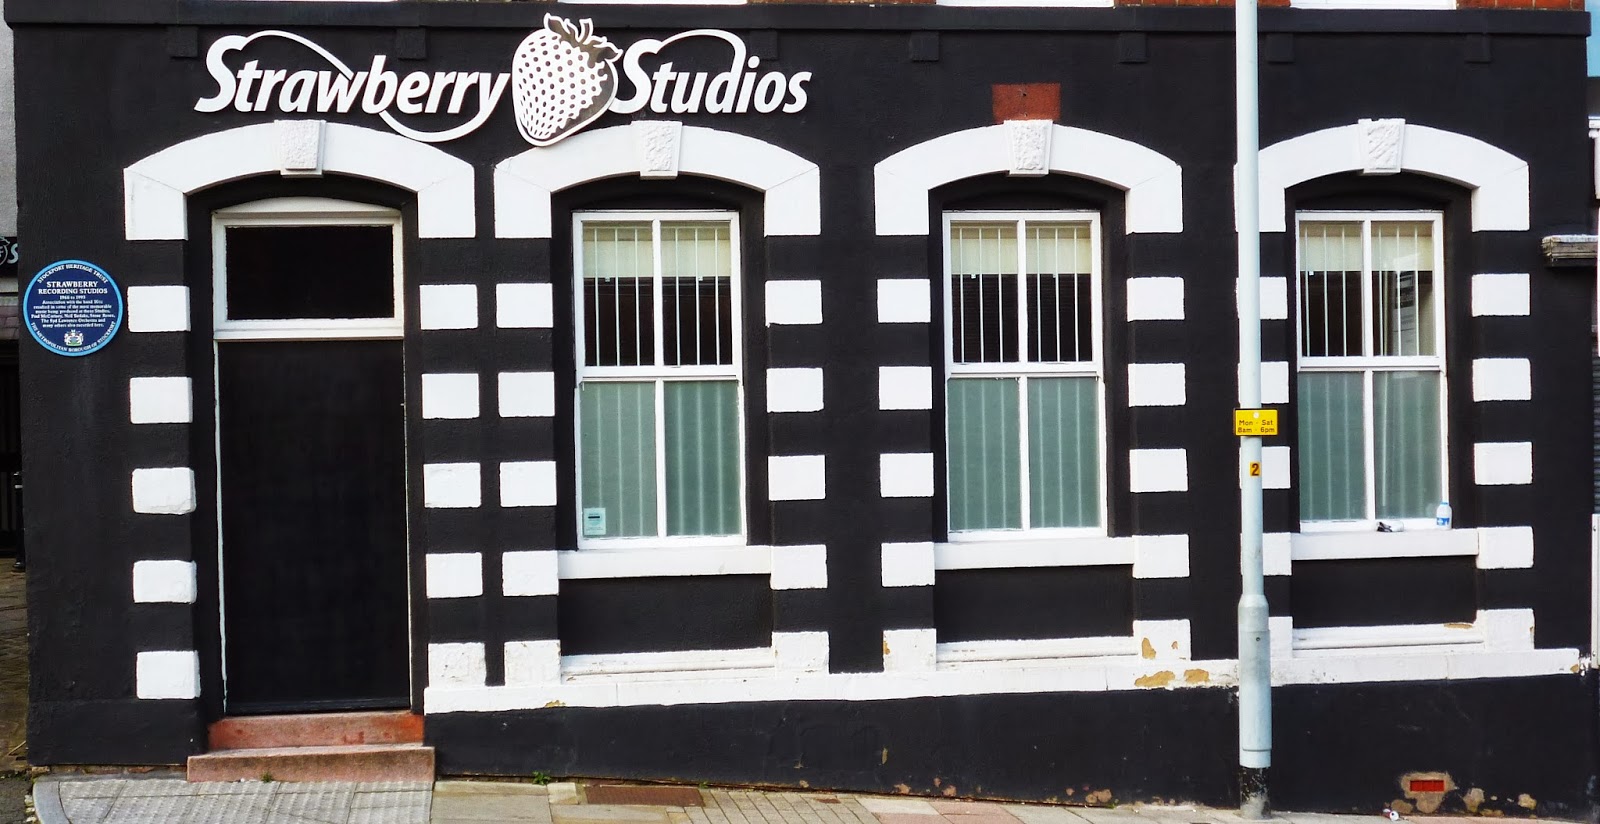 Dr Tony Shaw Strawberry Studios Stockport Greater Manchester